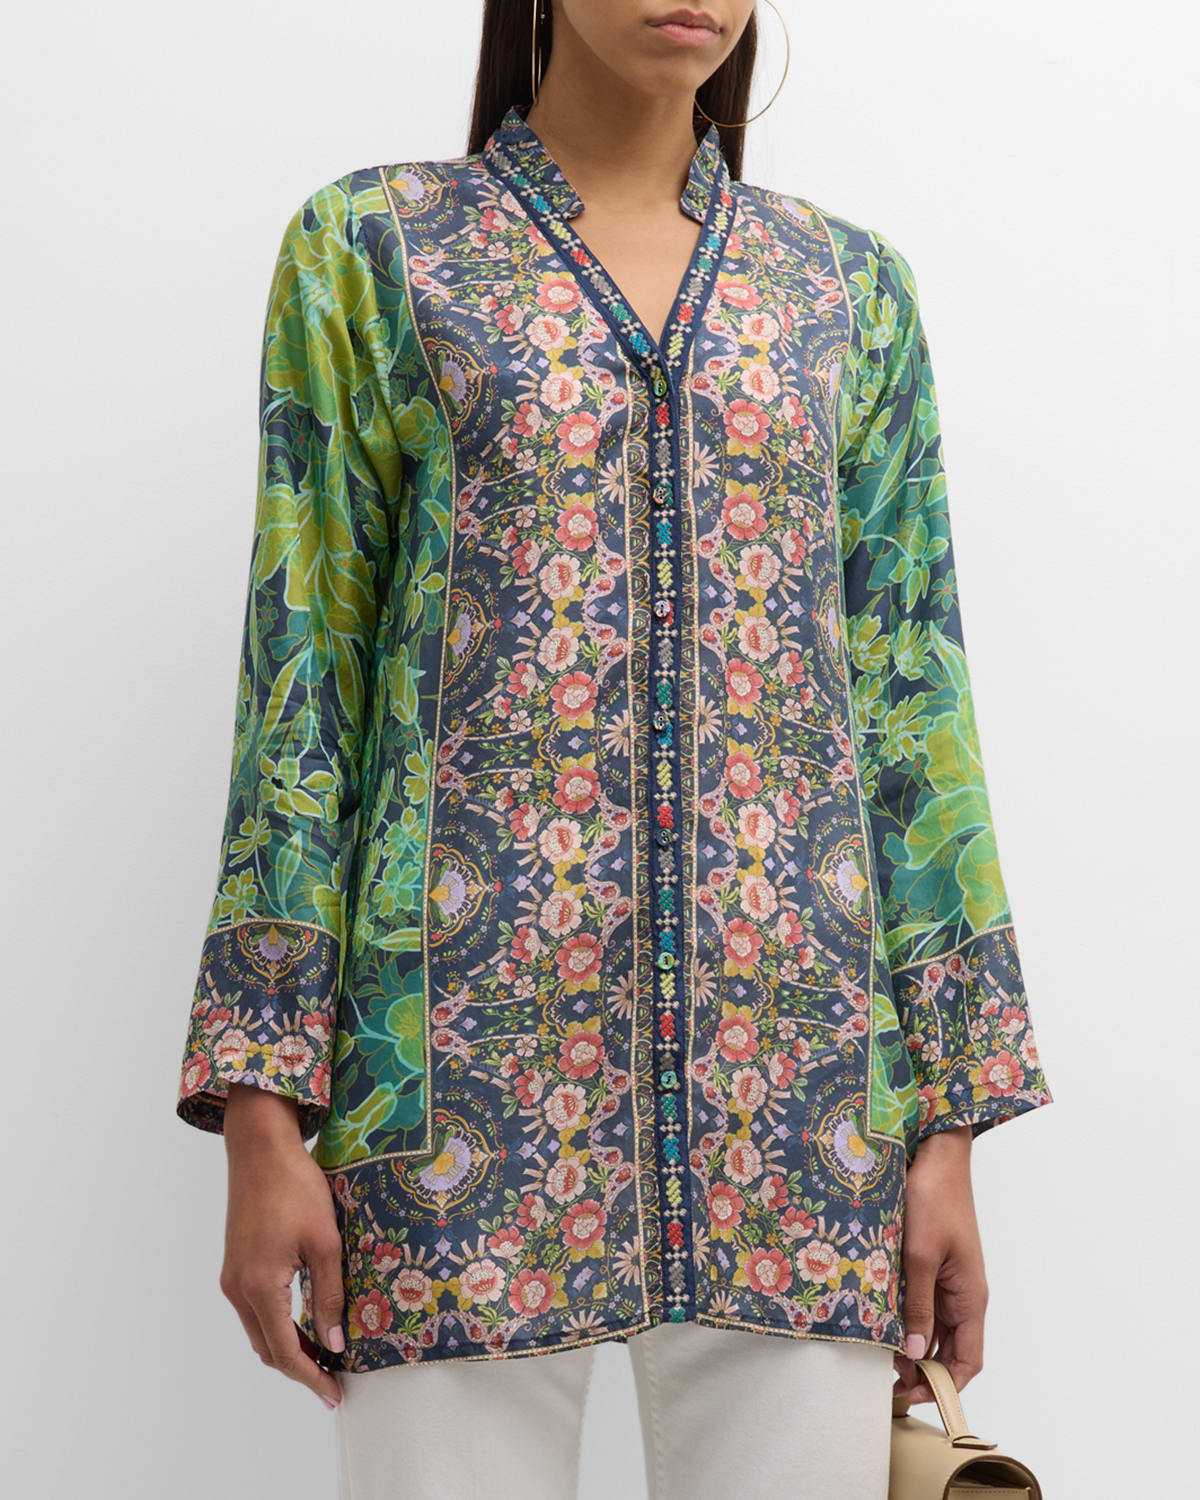 JOHNNY WAS HIRZ TALI FLORAL-PRINT EMBROIDERED-TRIM TUNIC